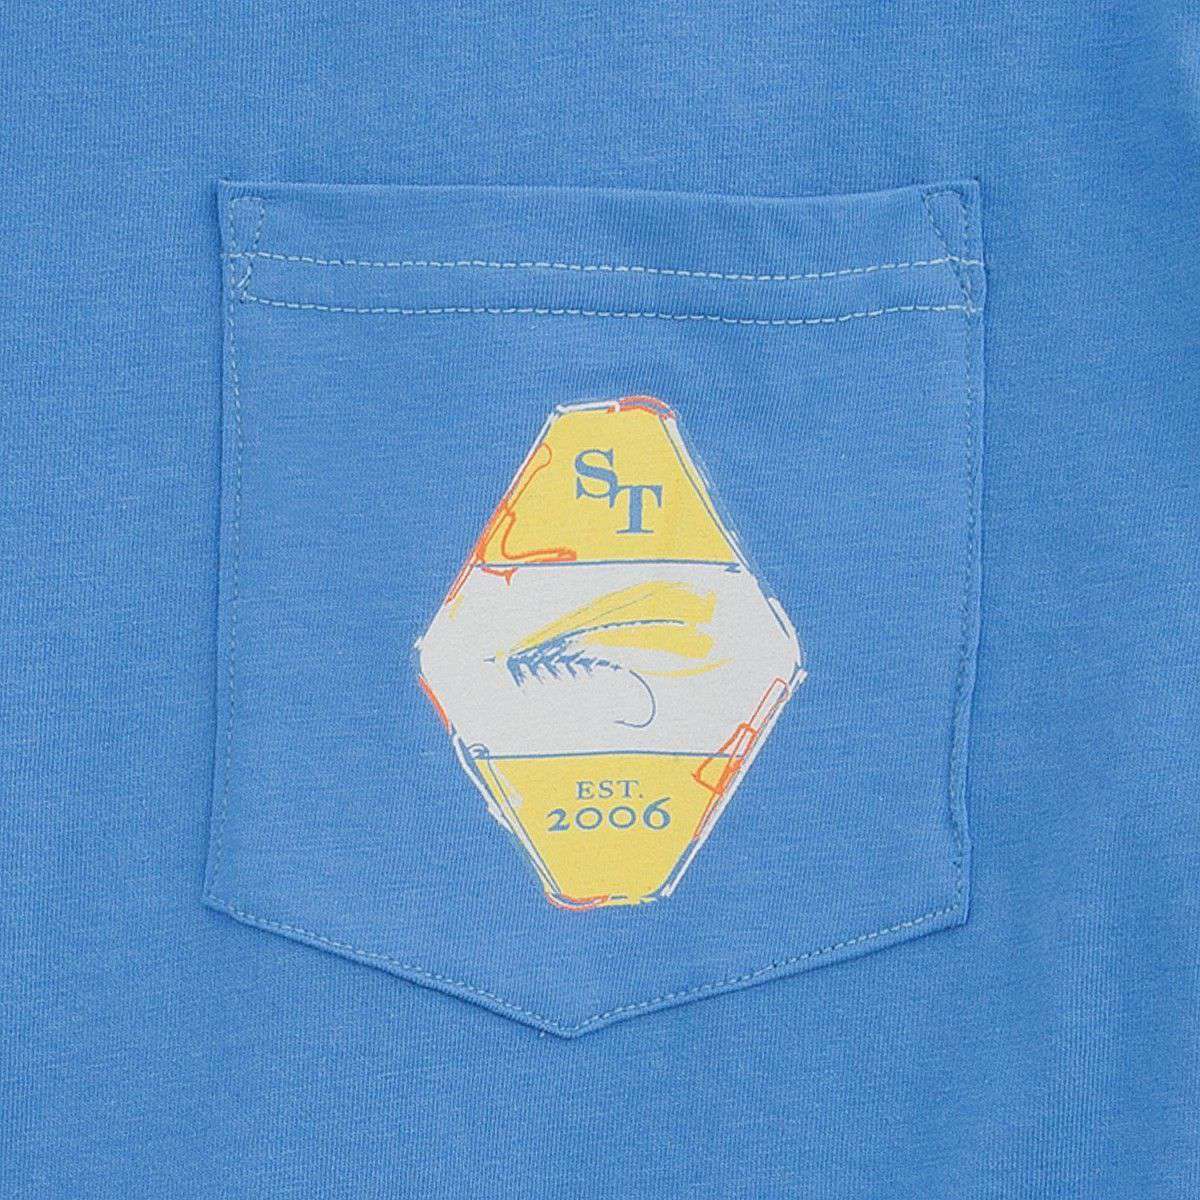 The Reel Deal Tee-Shirt in Charting Blue by Southern Tide - Country Club Prep